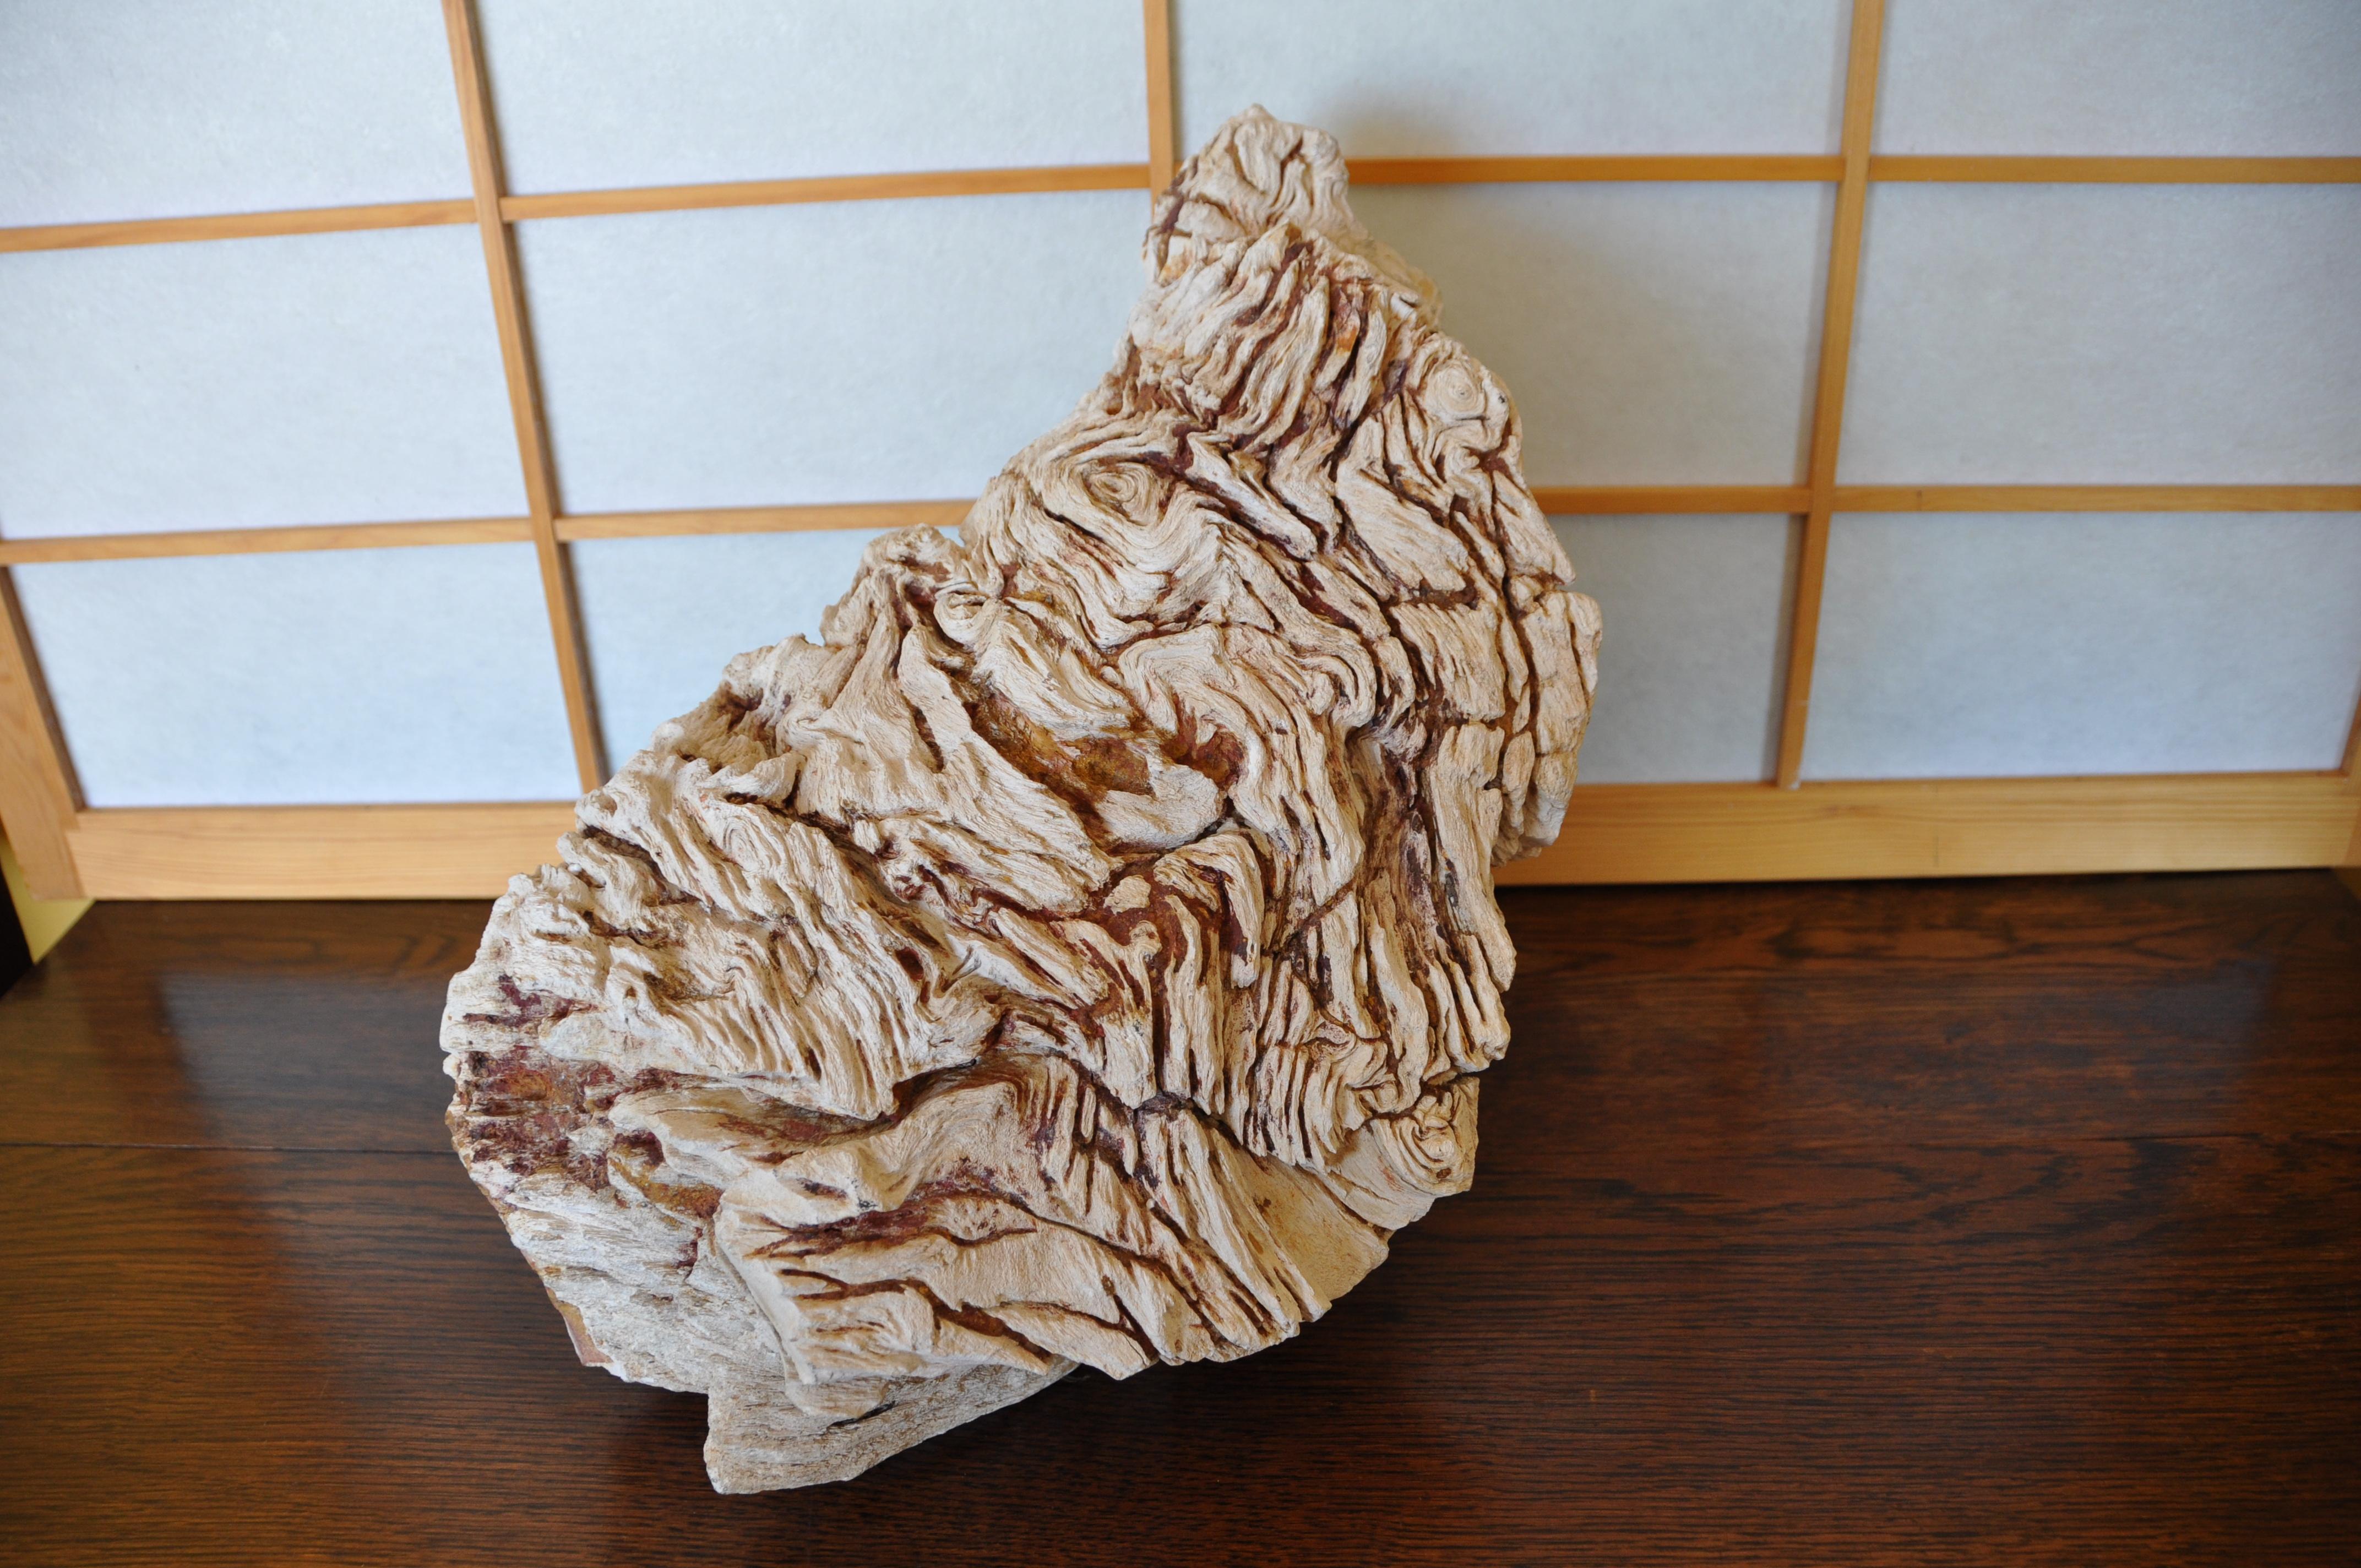 Central Asian Petrified Root Stock - Museum Quality Specimen 'Huge'